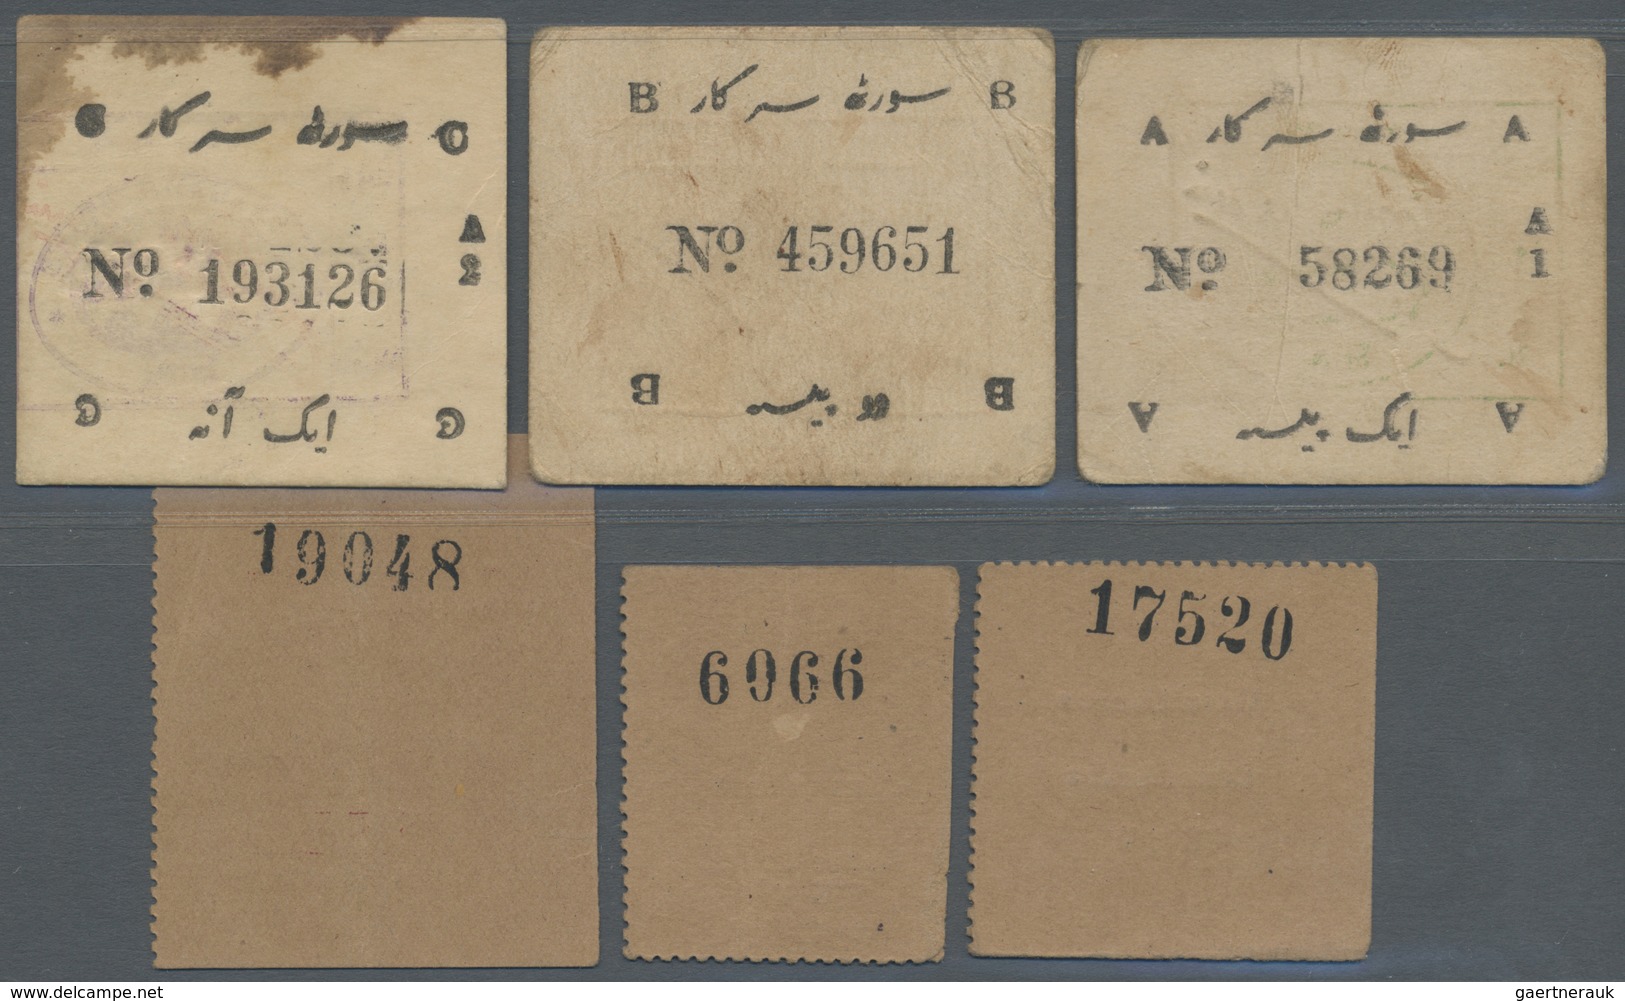 India / Indien: Set With 6 Coupons India Princely States Comprising 2 X 3 Pies And 1 Anna Bundi Stat - India